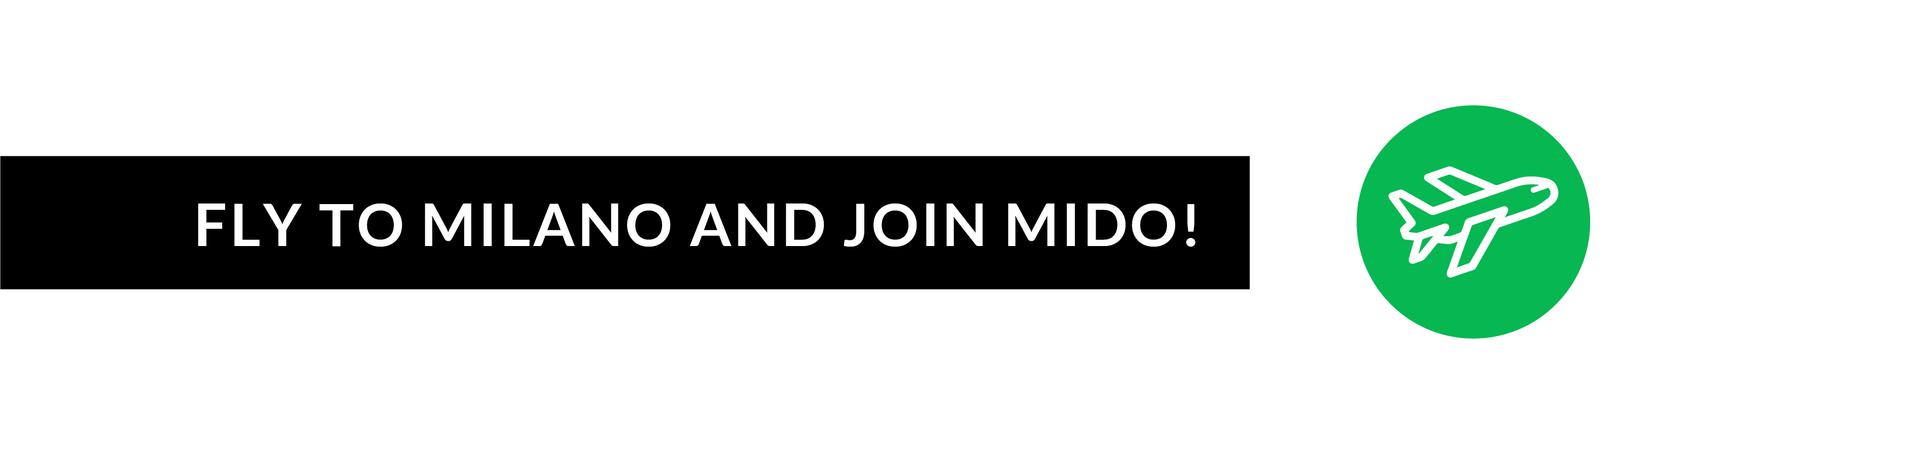 Fly to Milano and join MIDO!